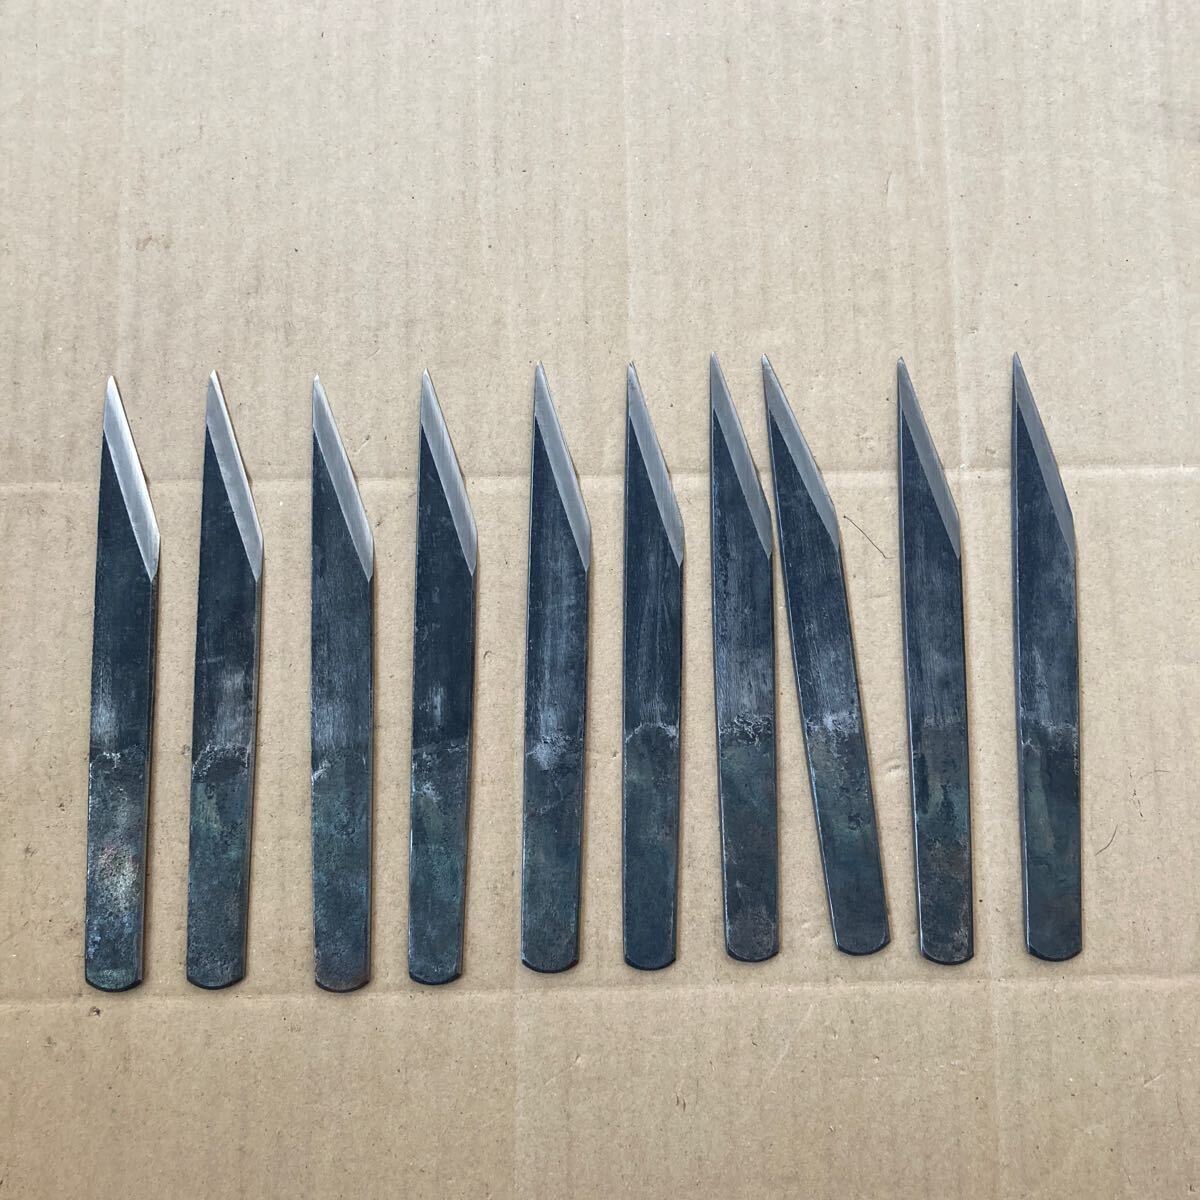 *08 metallic material shop stock goods unused goods sound circle cut ... knife 10 point together total length approximately 180mm blade . approximately 53mm